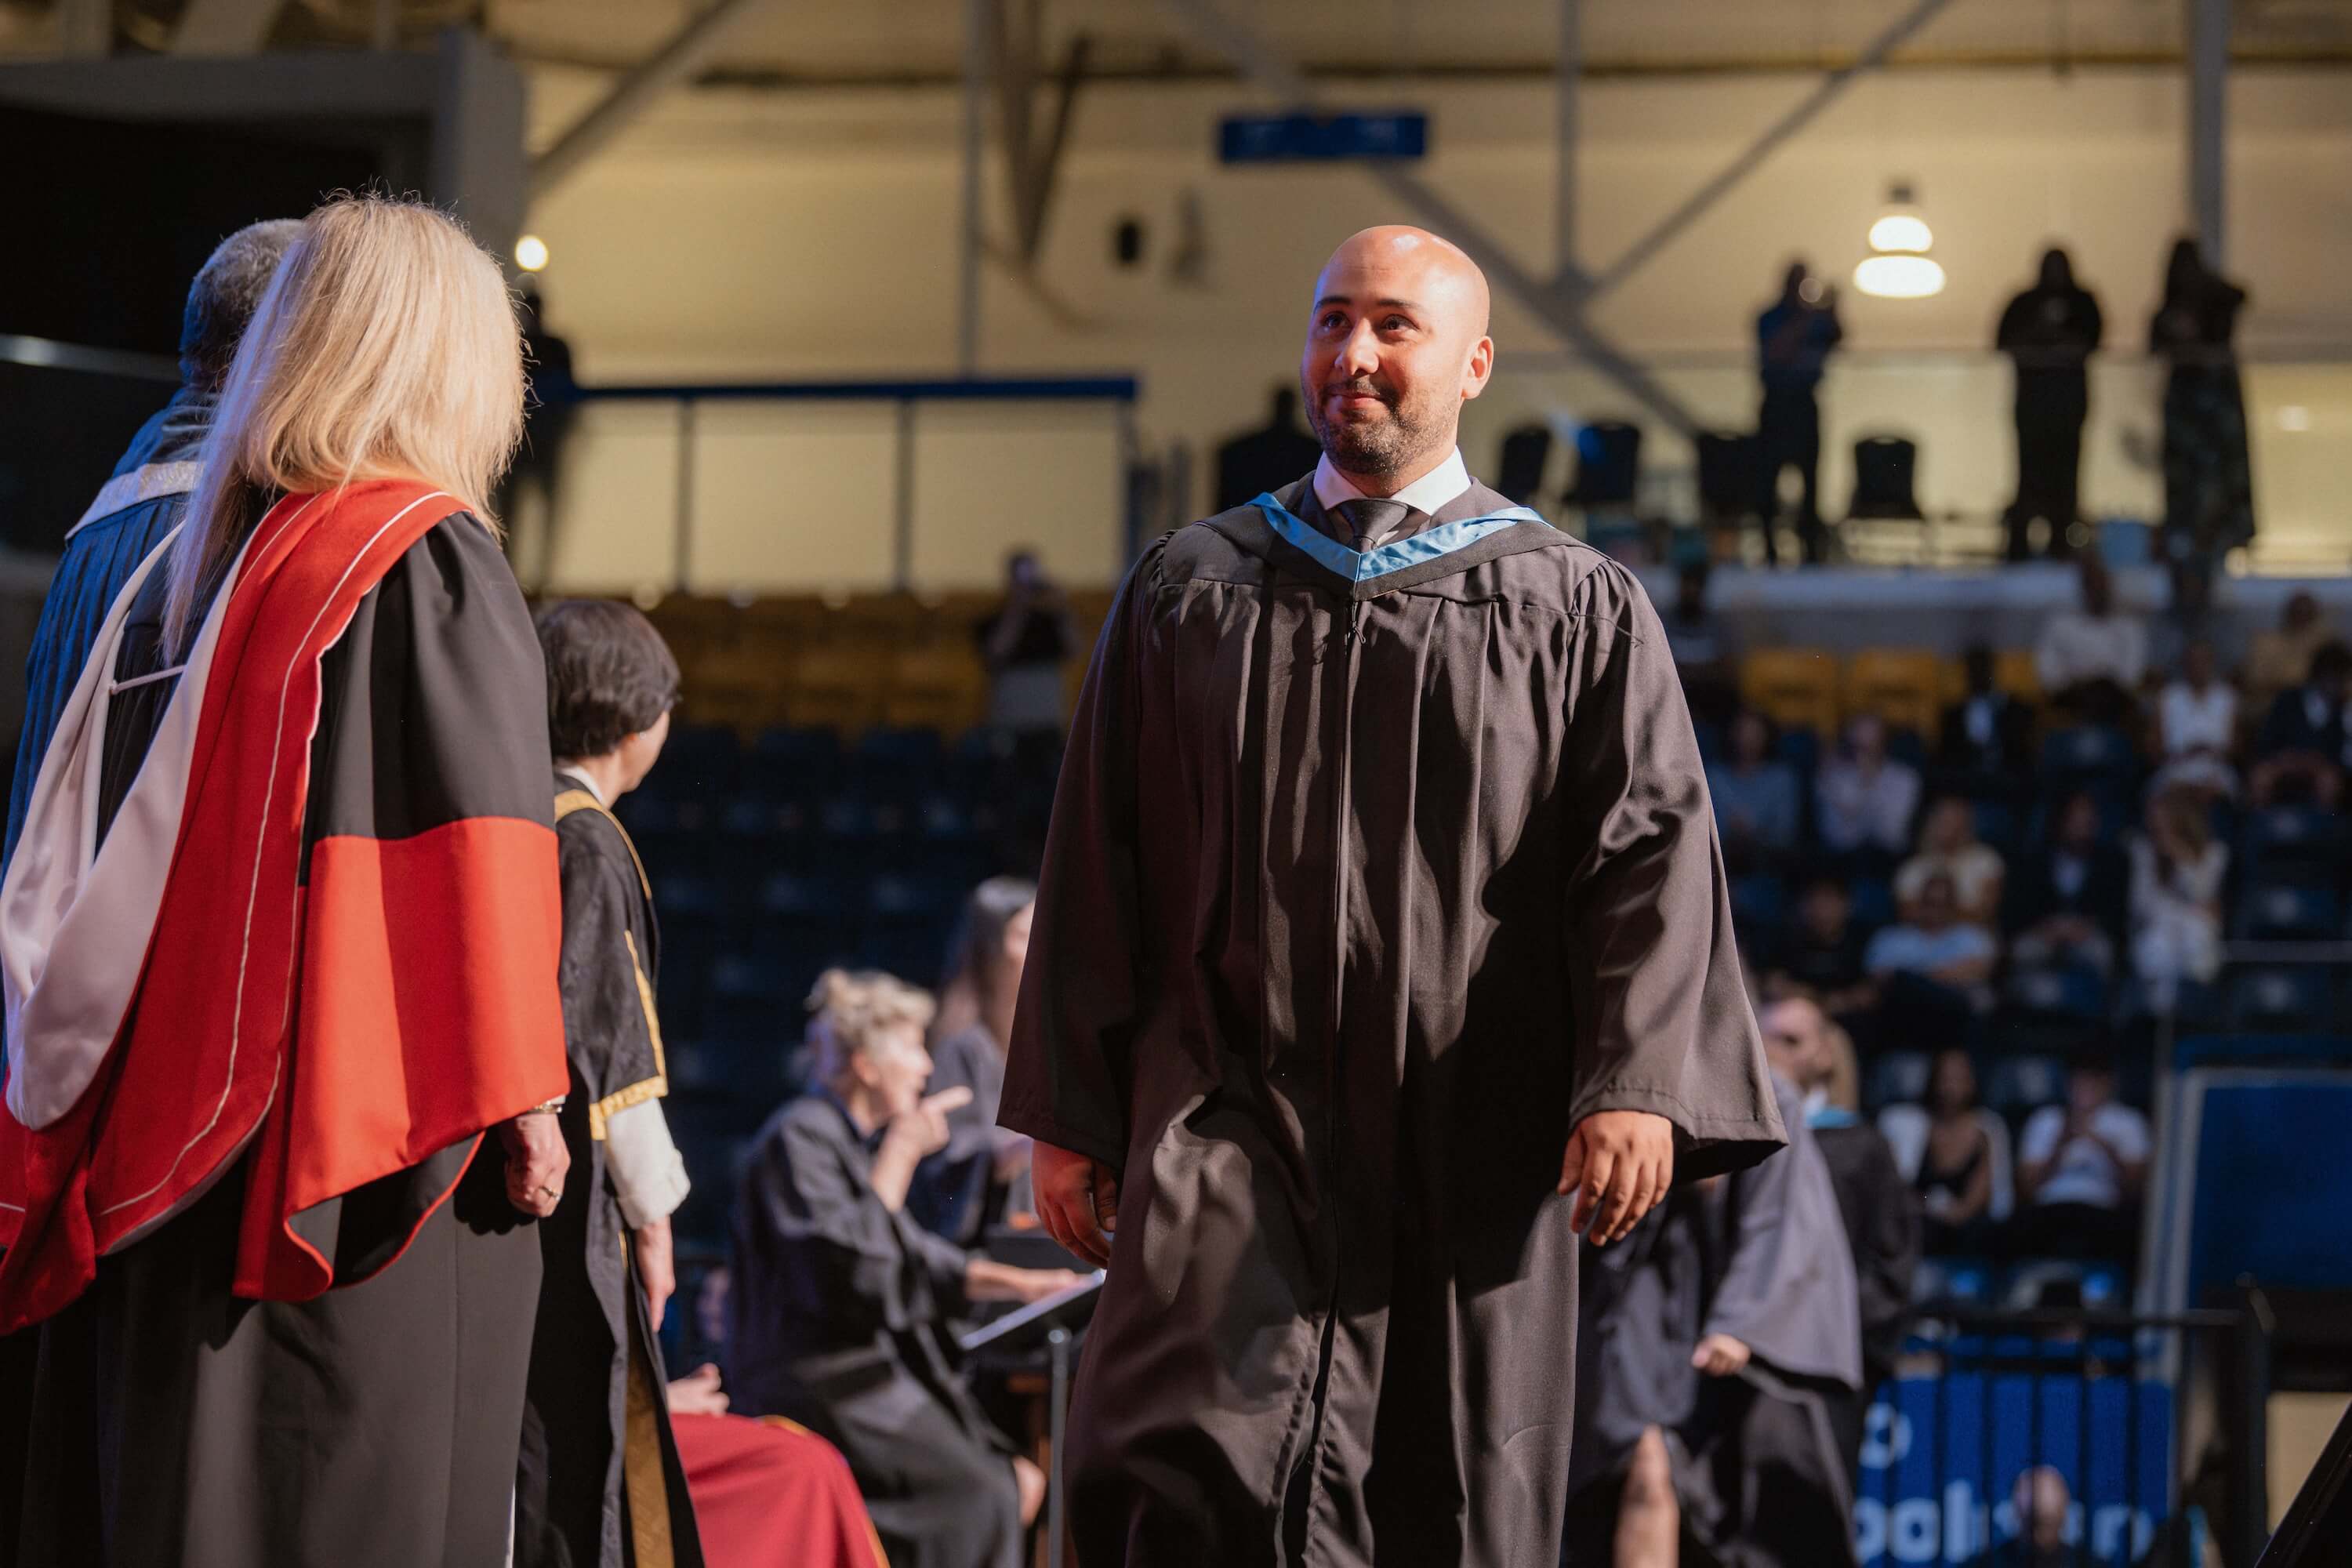 A man walking across the stage at Convocation.